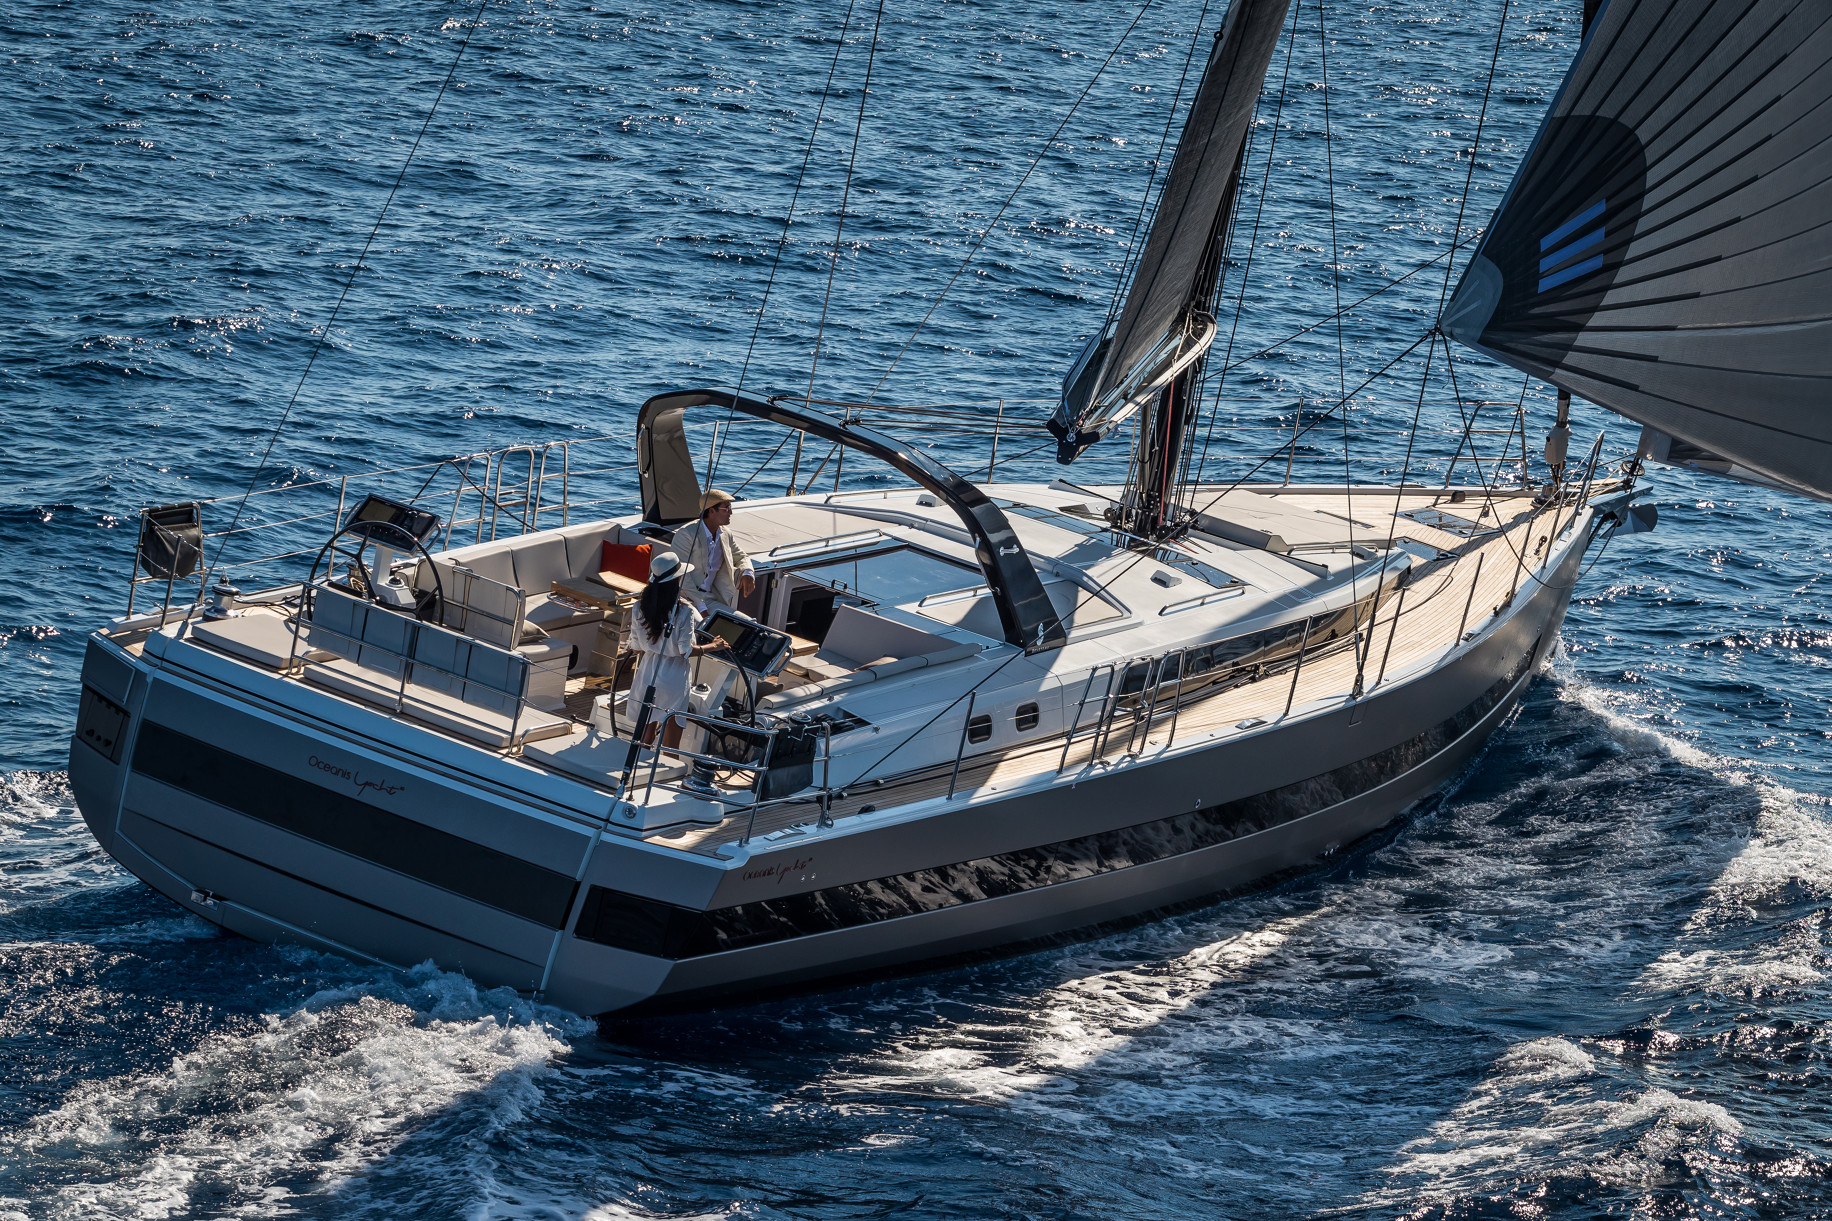 Isle Porquerolles, France, 28 september 2016.The all new Oceanis Yacht 62 By Beneteau.Ph: Guido Cantini / Sea&See